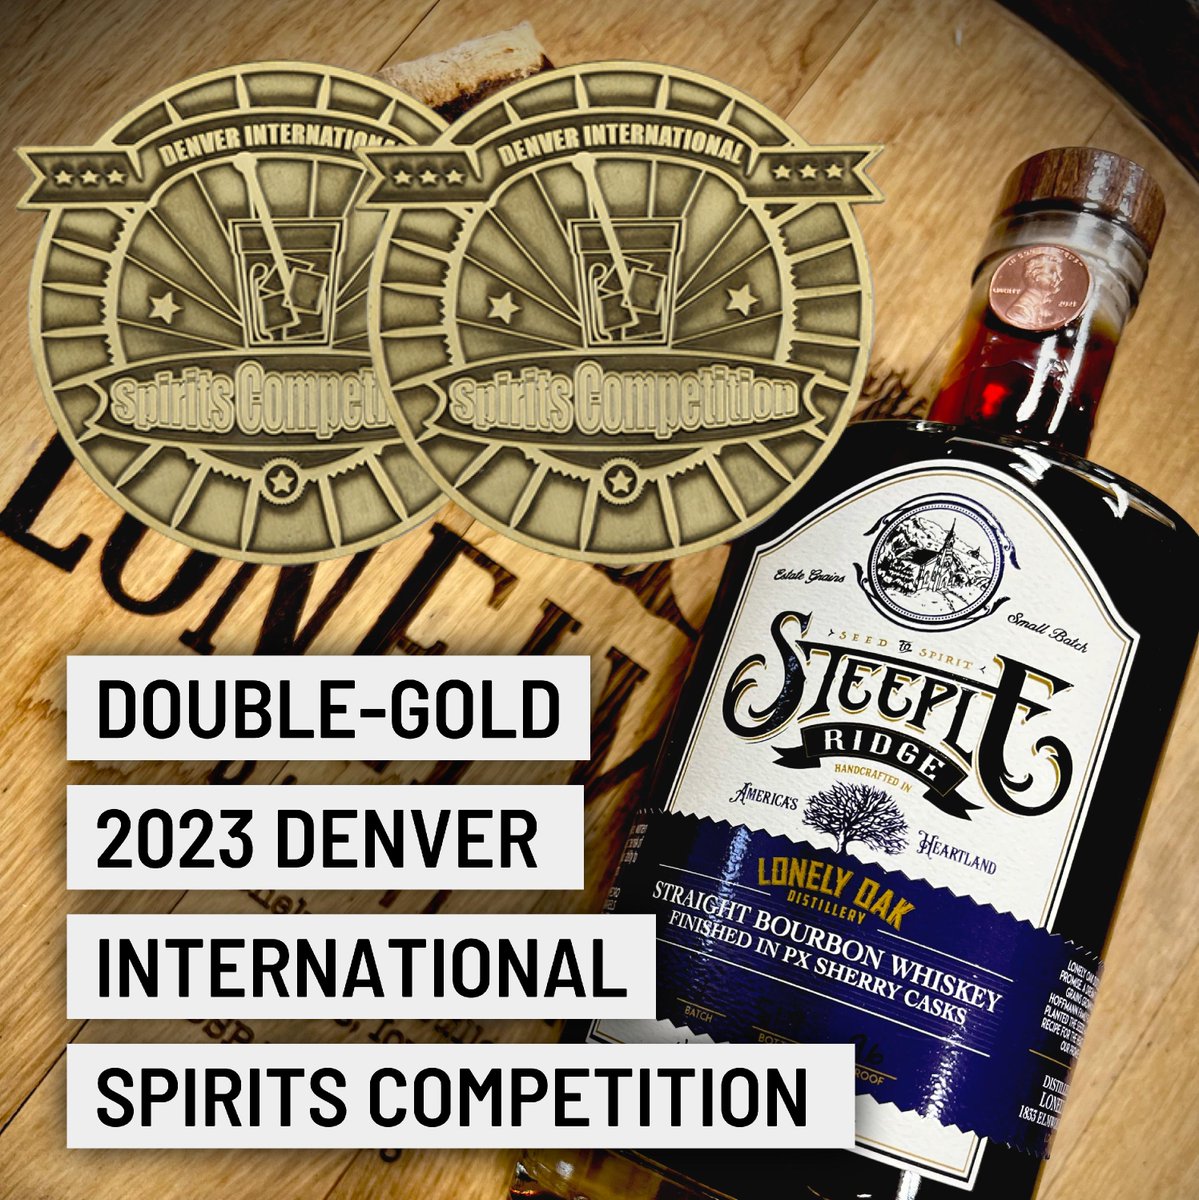 We are thrilled to announce that our Steeple Ridge PX Finished Bourbon has won DOUBLE-GOLD at the Denver International Spirits Competition. We would like to thank our customers and supporters for helping us achieve this milestone. 

#Bourbon #Iowa #Whiskey #farmtotable #farmlife